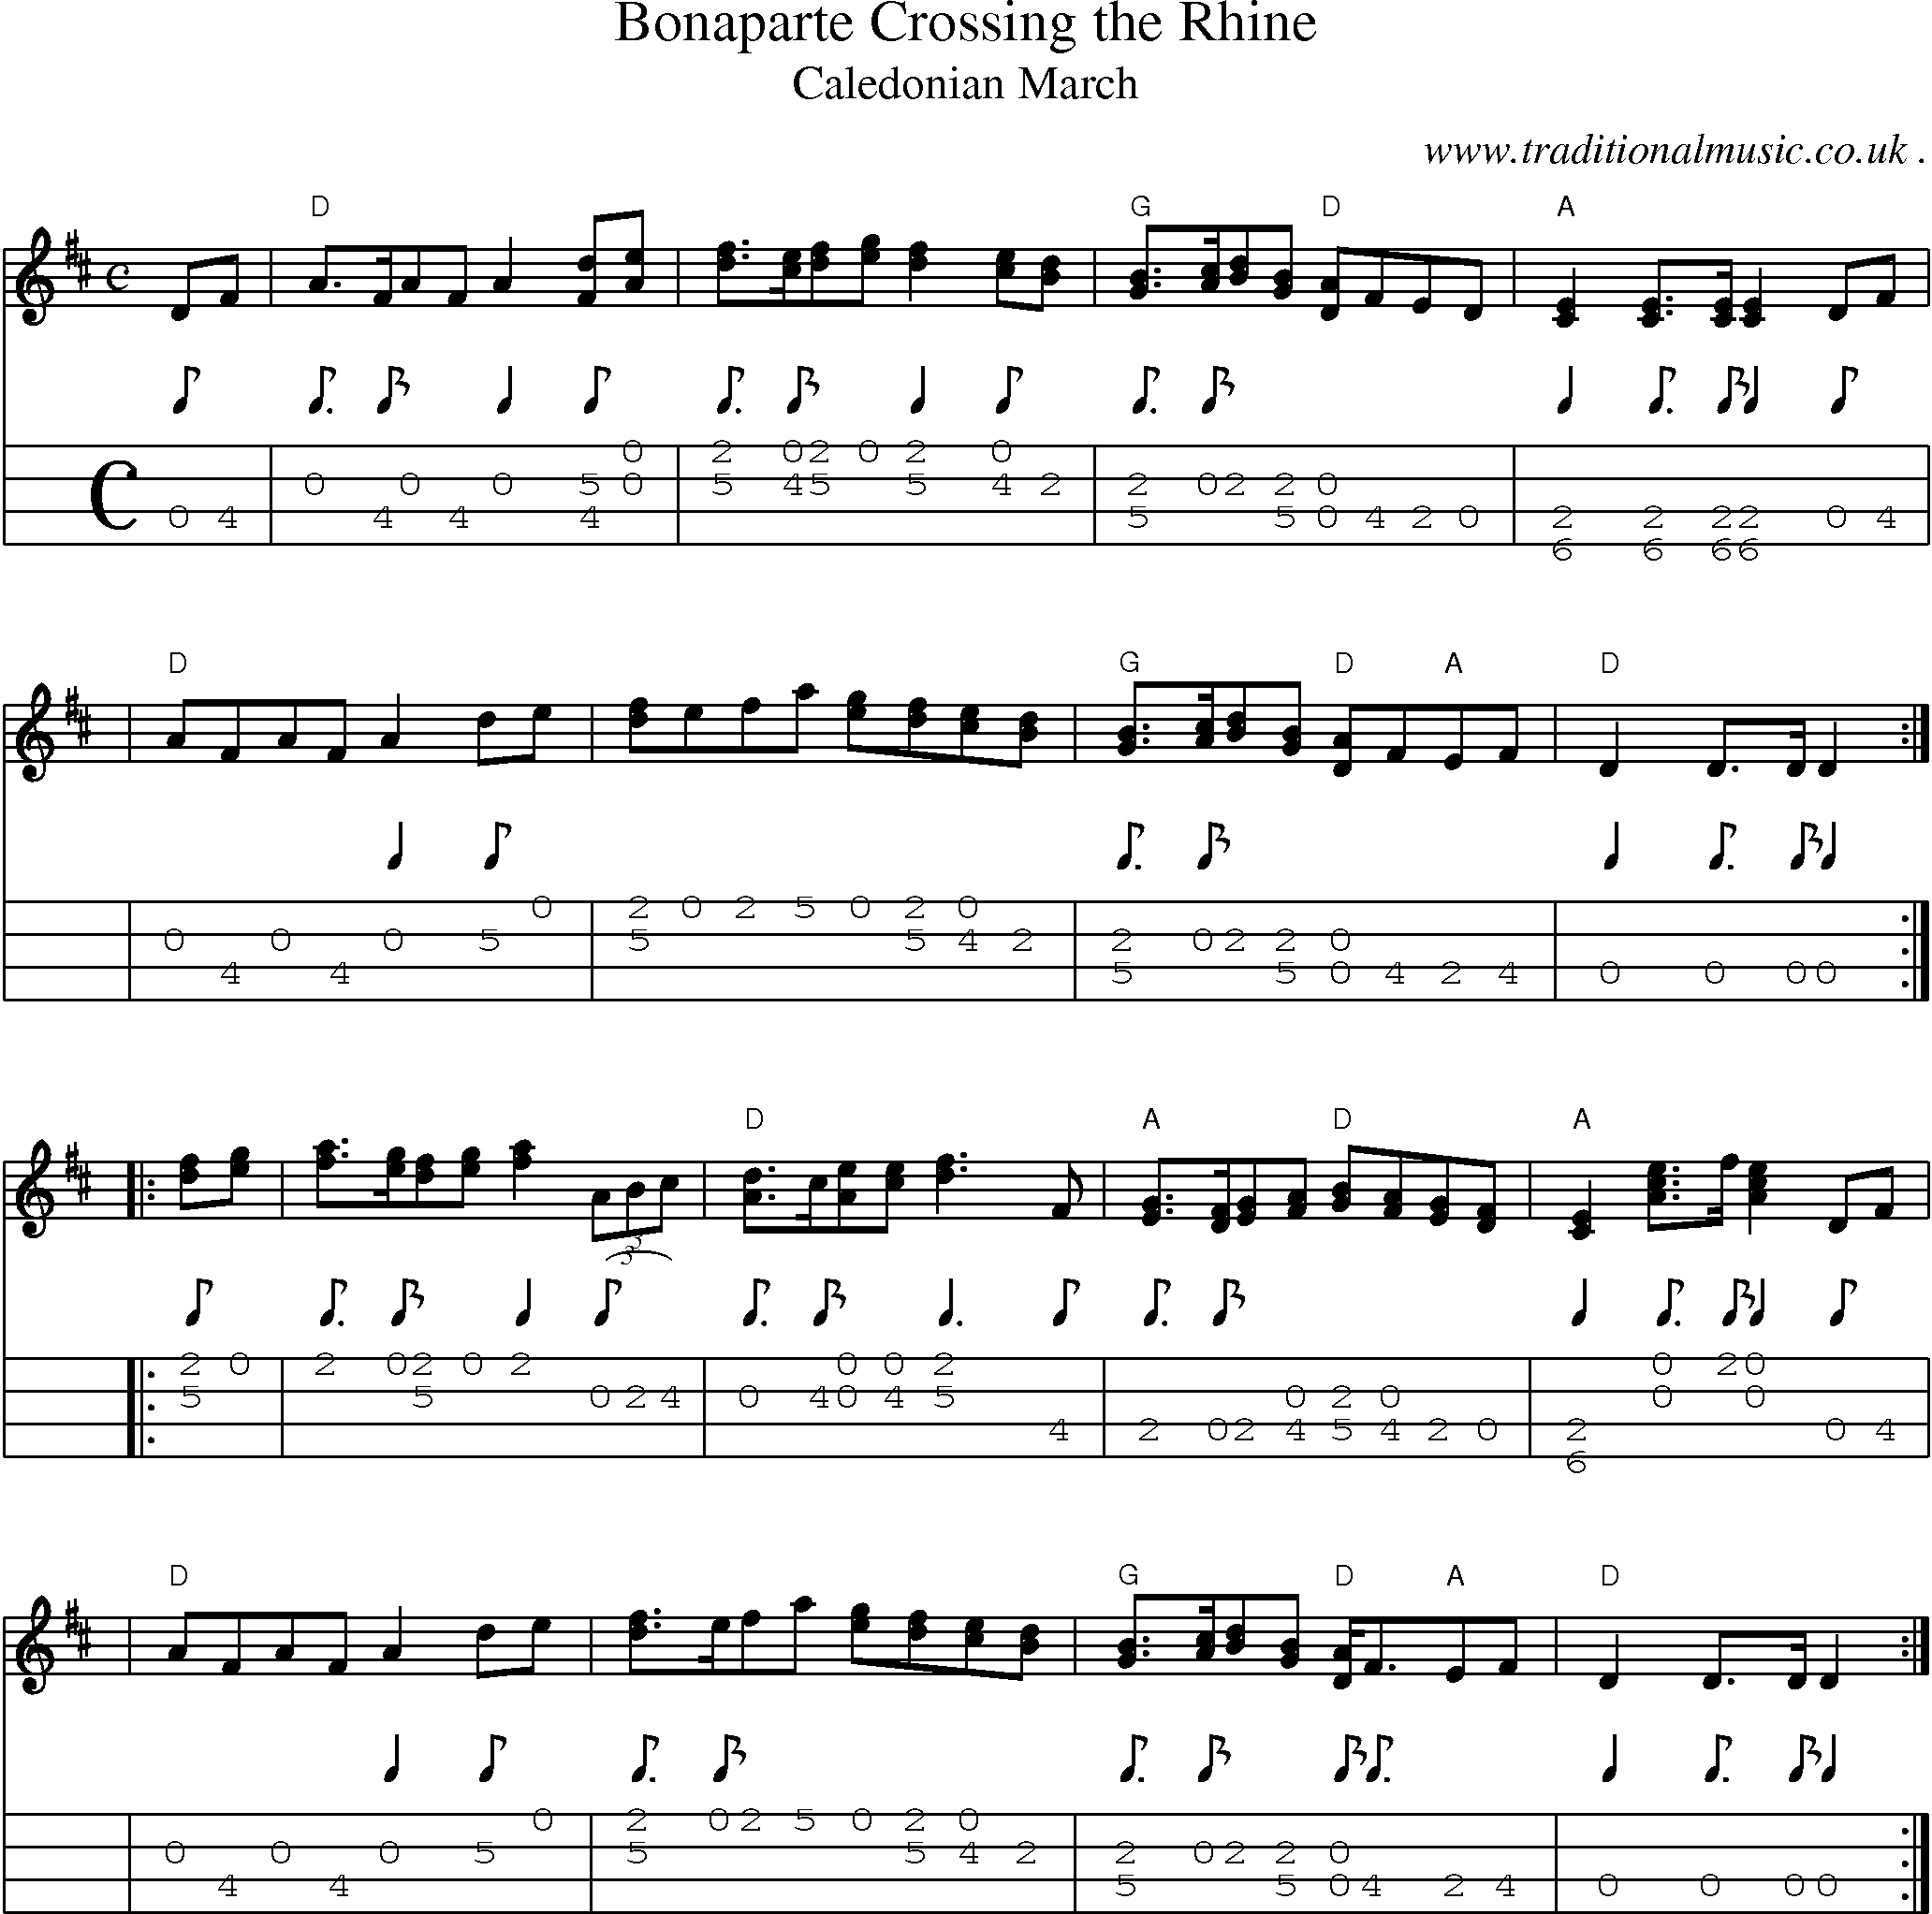 Sheet-music  score, Chords and Mandolin Tabs for Bonaparte Crossing The Rhine